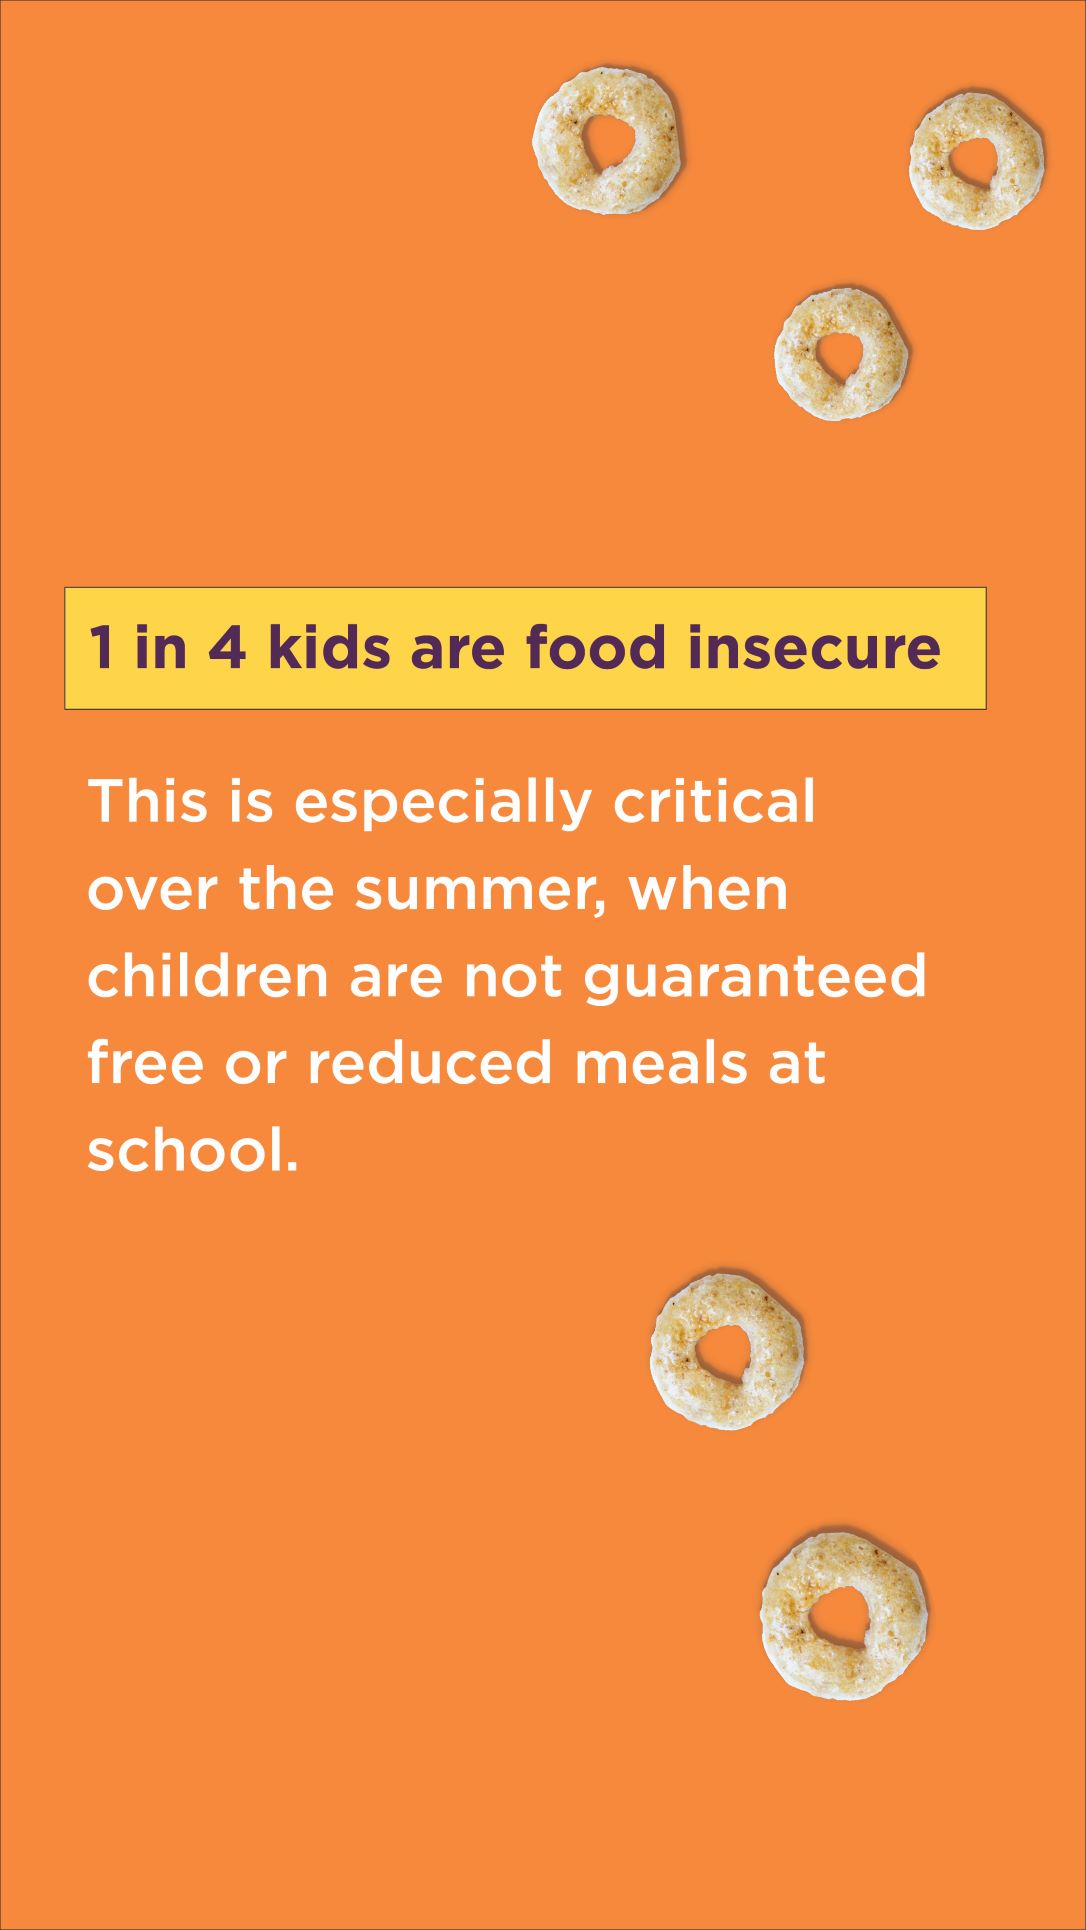 Graphic stating "1 in 4 kids is food insecure"